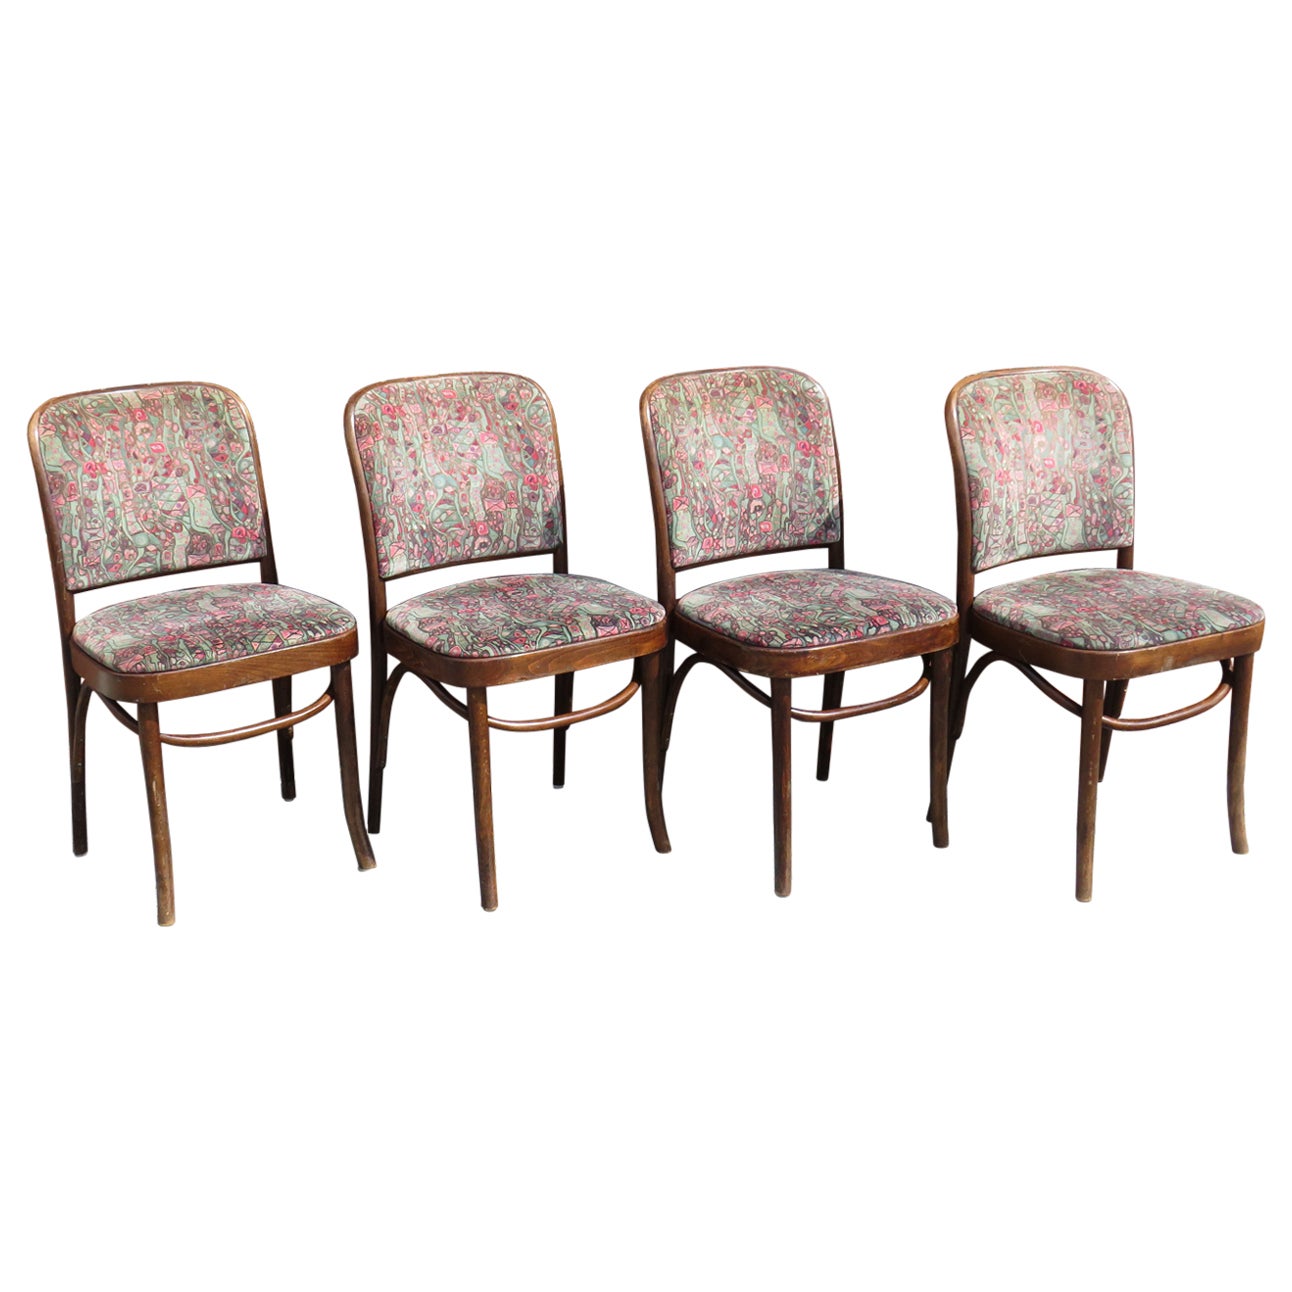 4 Thonet Chairs, Model Prague No. 811, First Half of the 20th Century